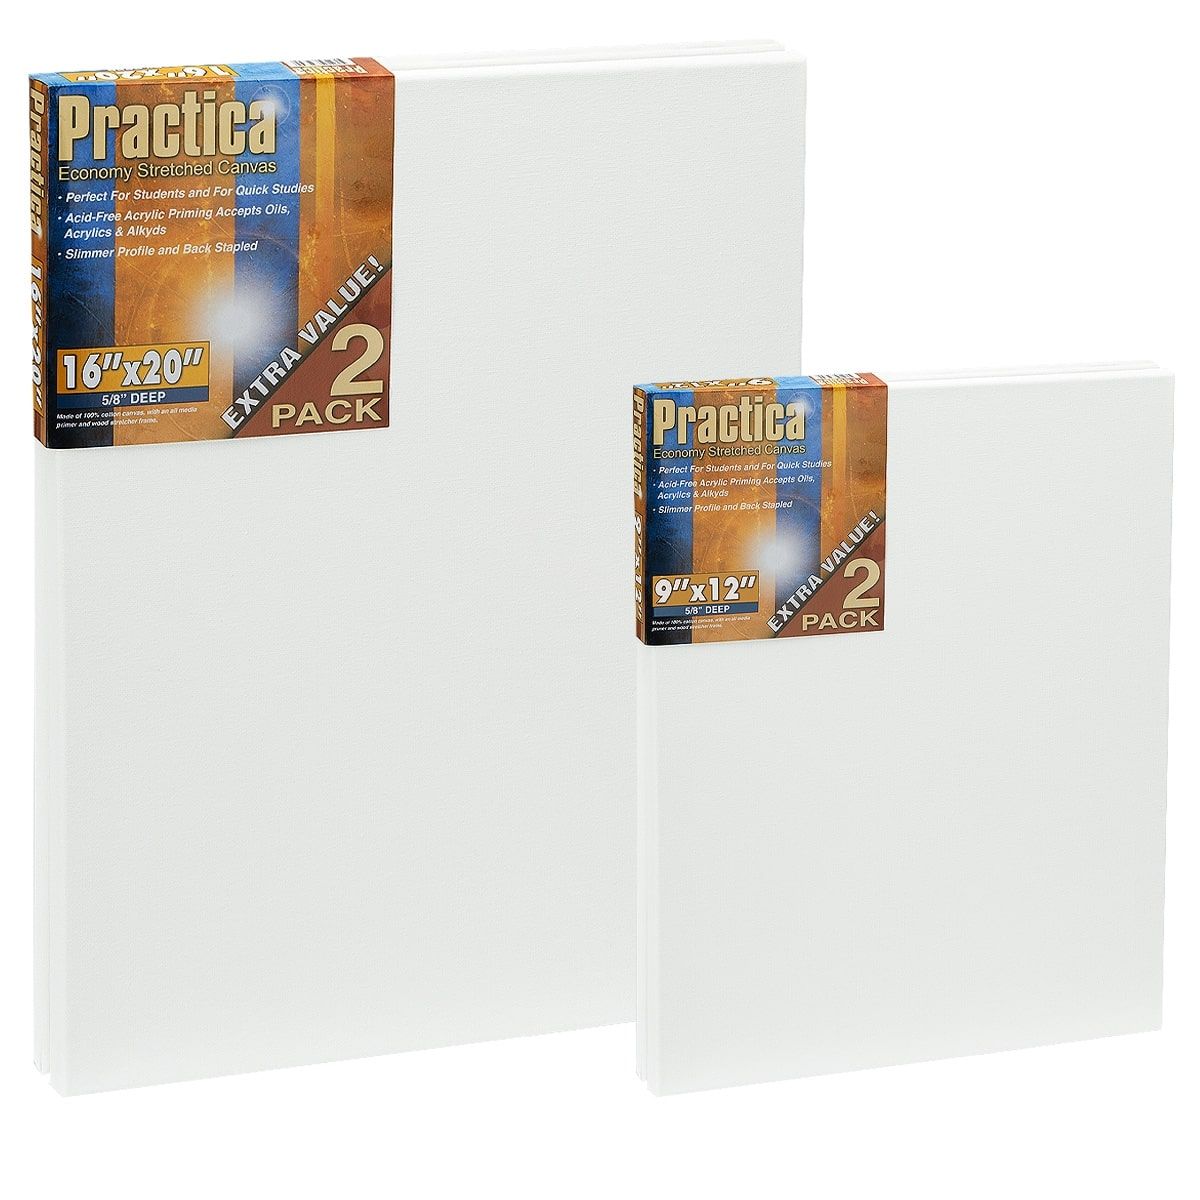 2-Pack Large Drawing Sketch Pad for Kids-12 x 16, 50 Page